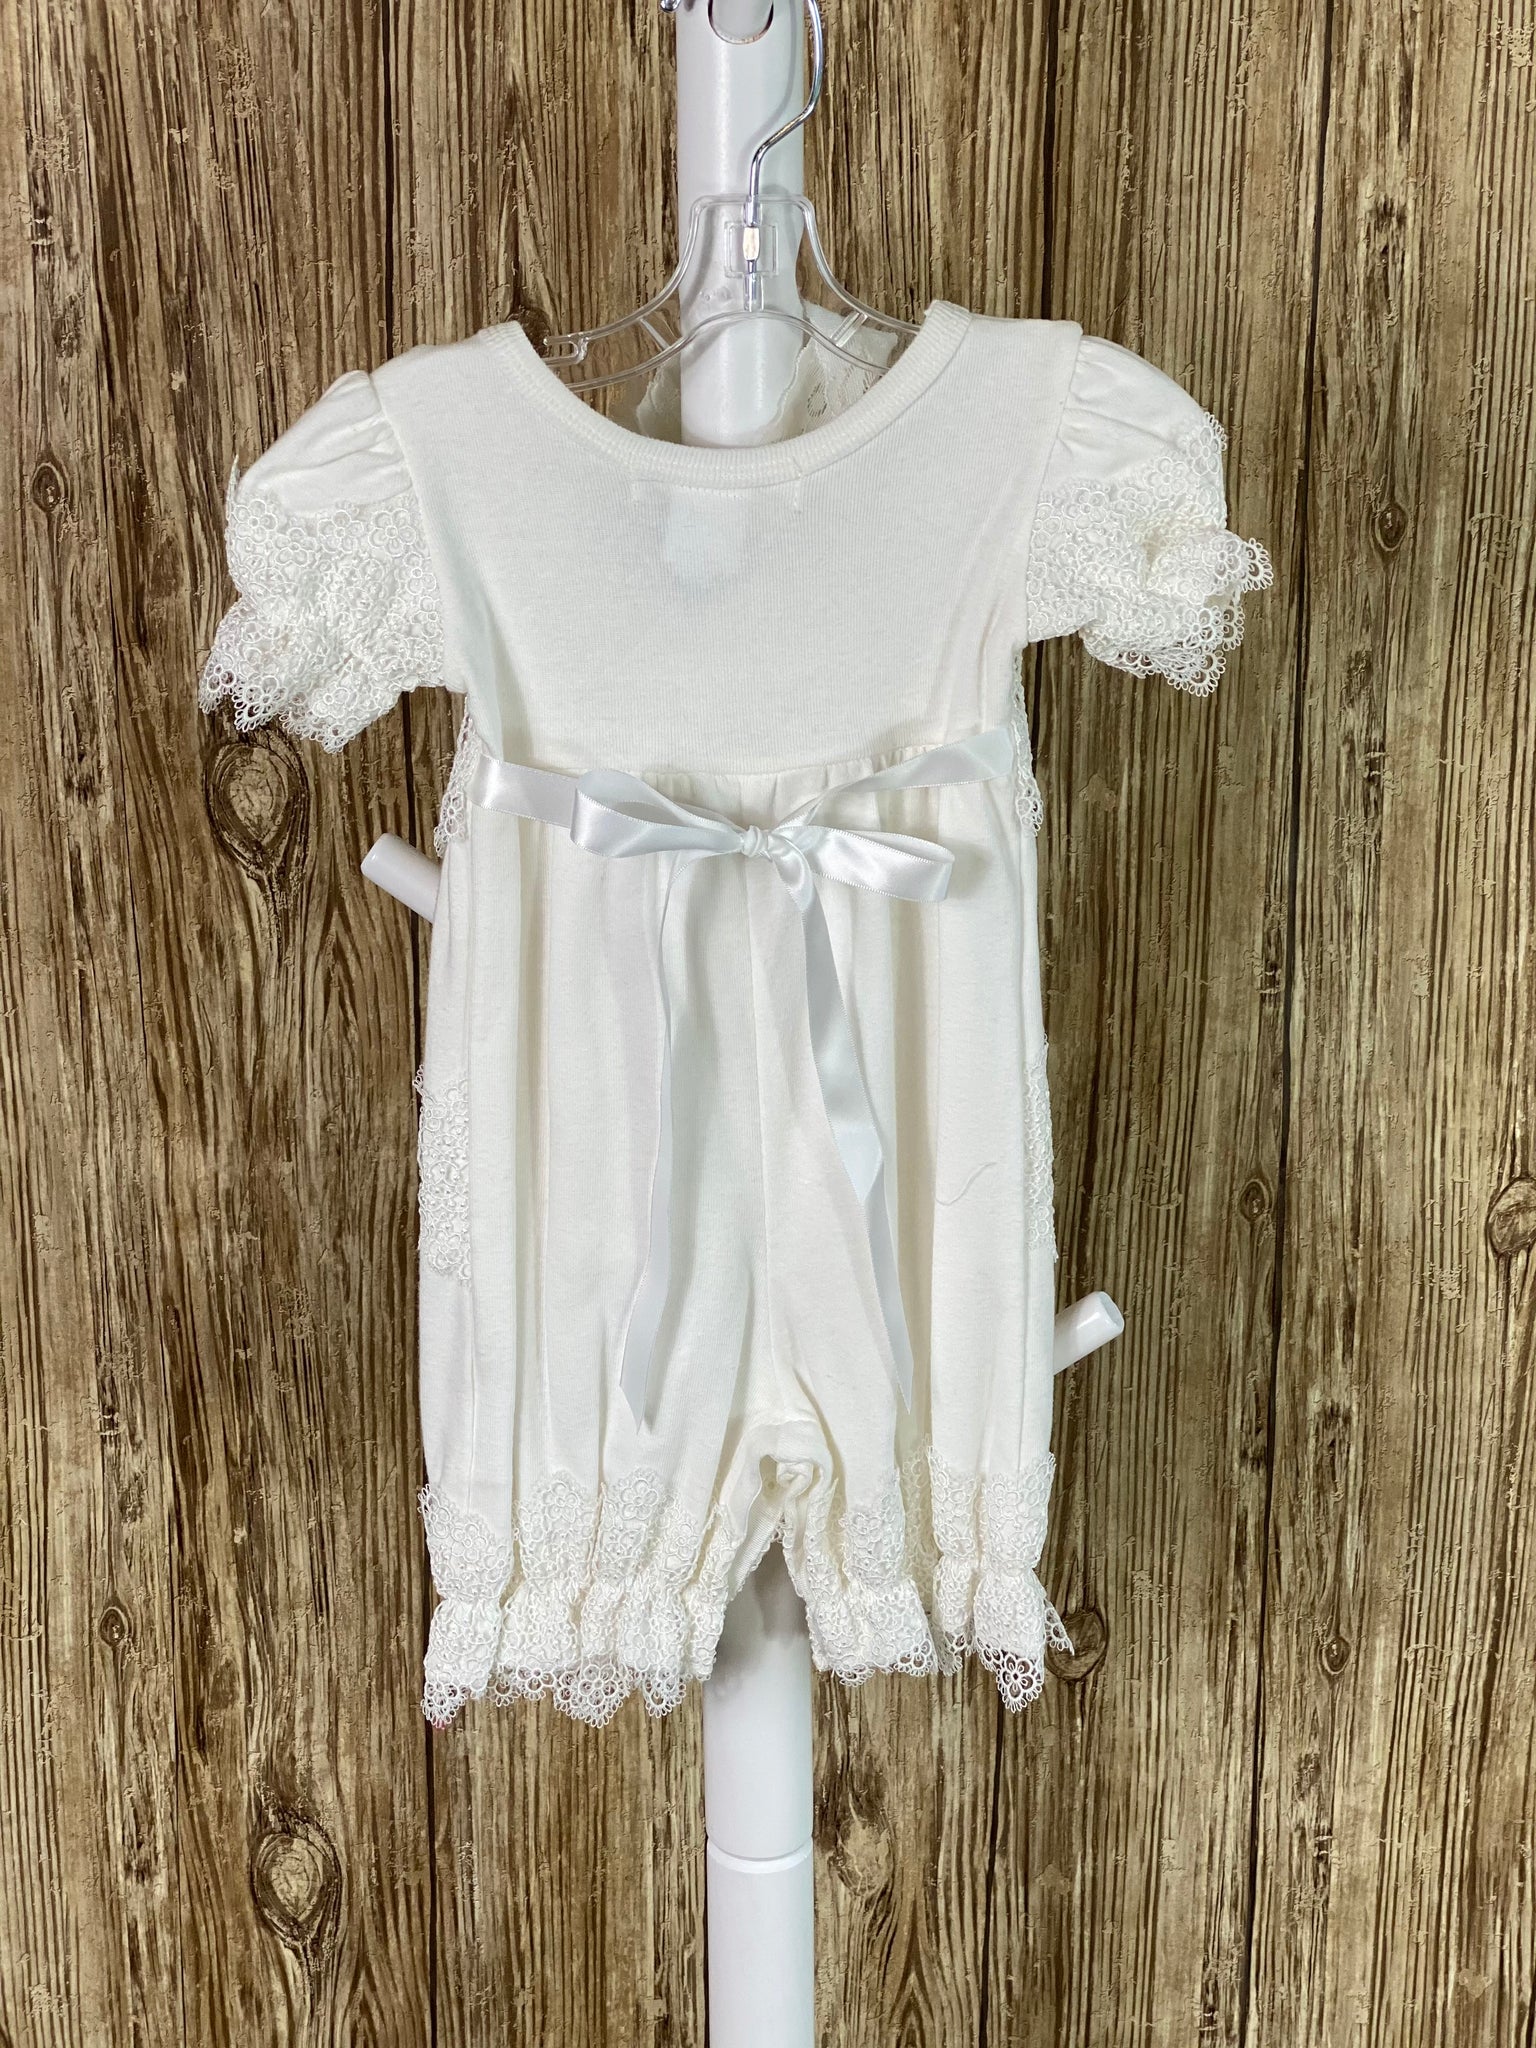 Ivory cotton romper Lace ruffles around bodice  Lace ruffles around legs Lace ruffles around arms Flowers on bodice lace ruffle Lace headband with flowers